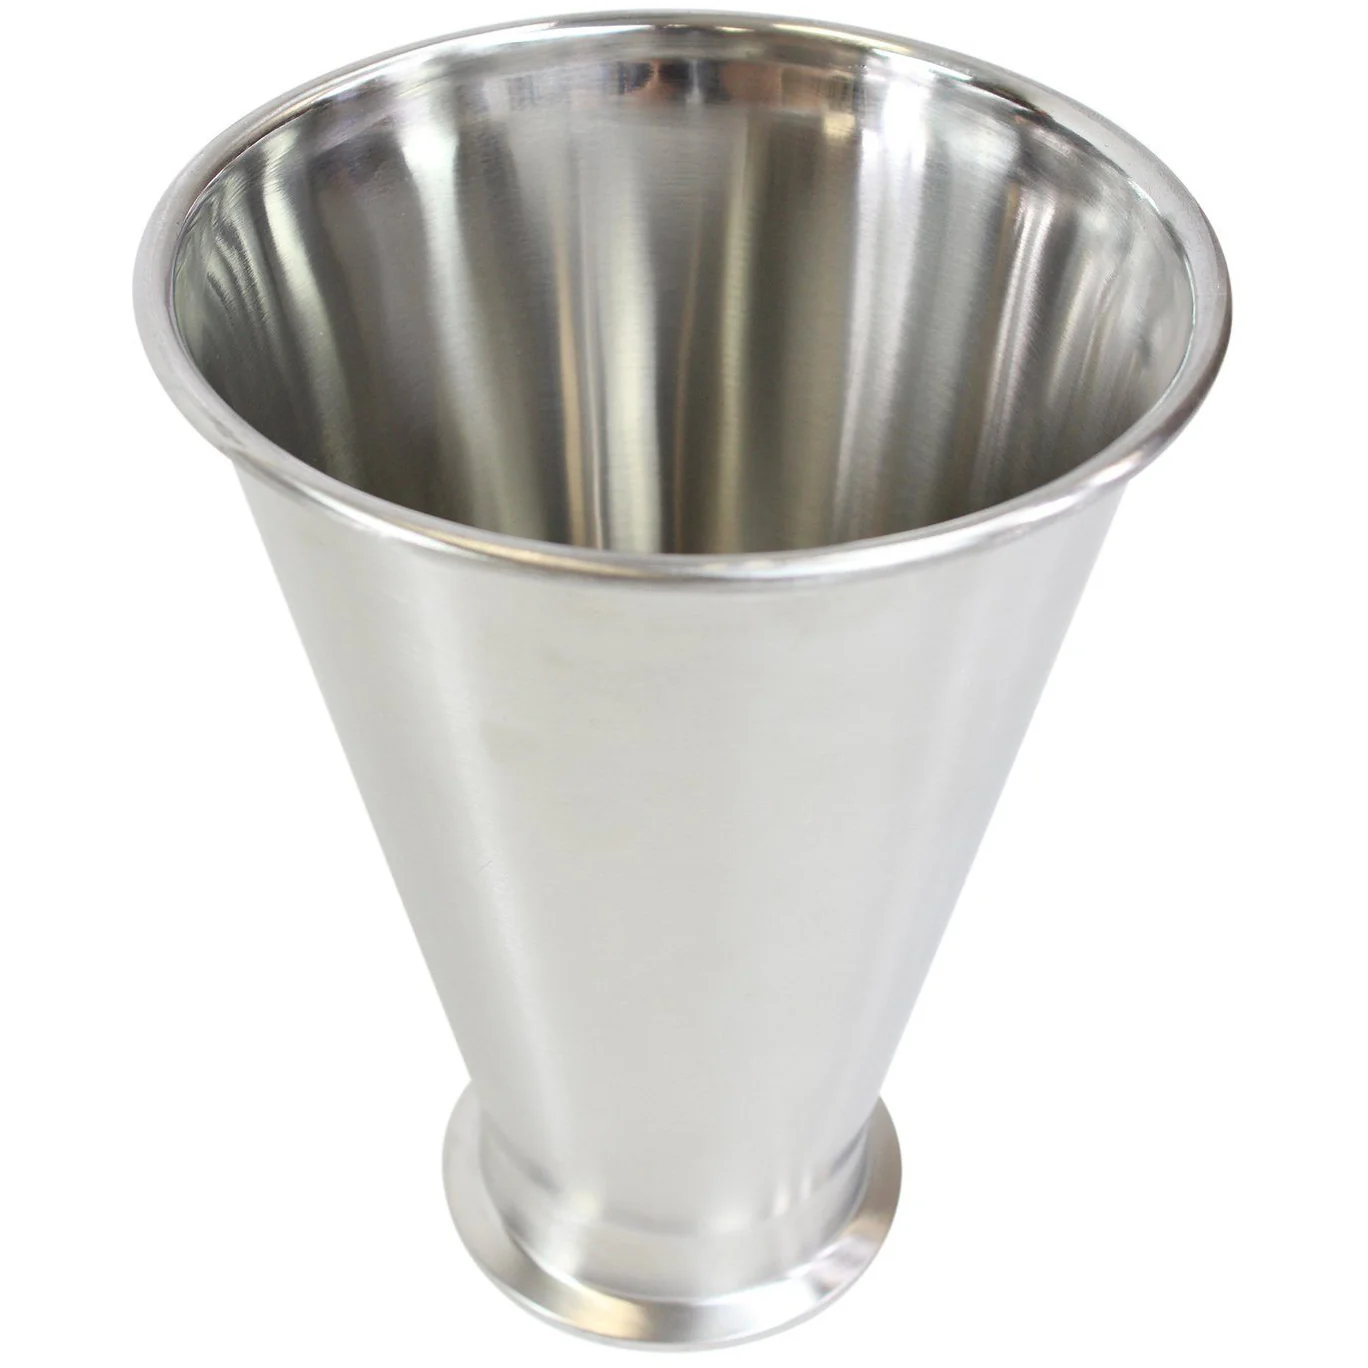 What is the volume of the funnel?